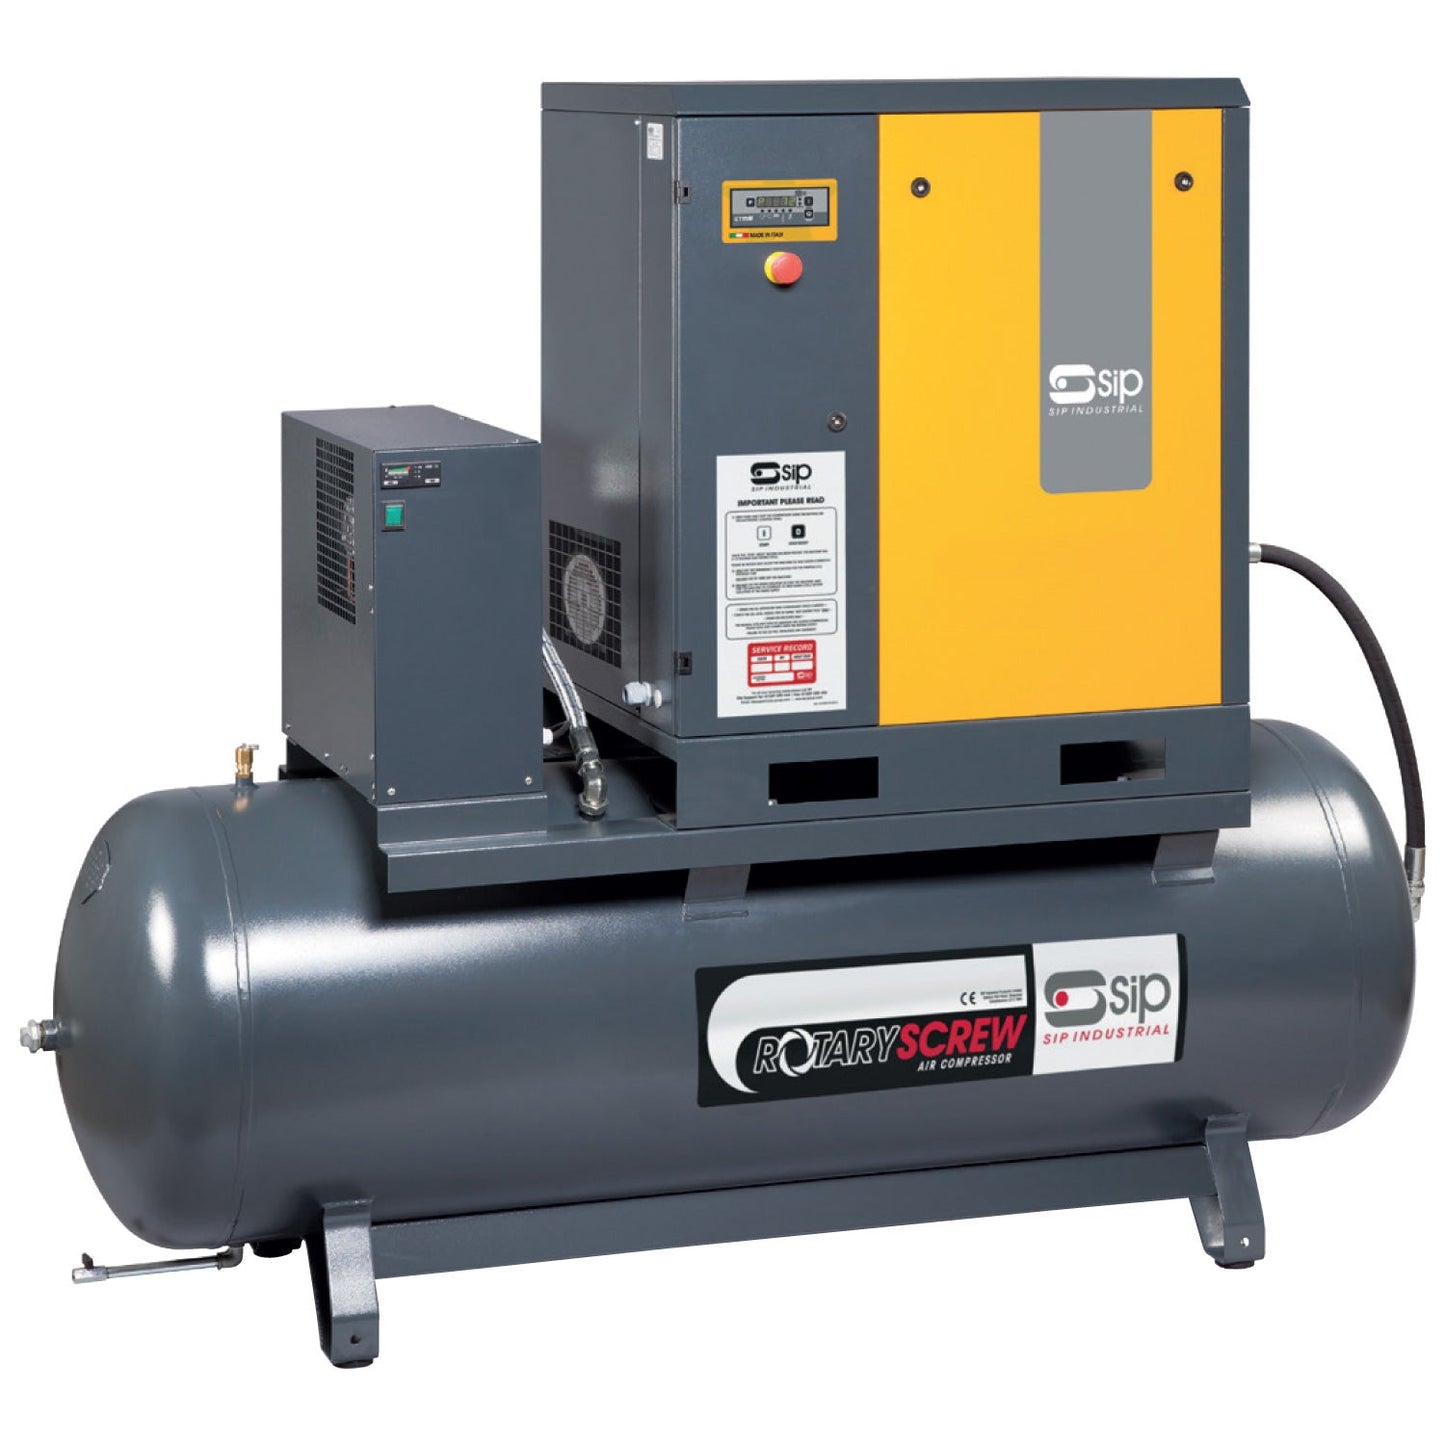 SIP RS15-10-500BD/RD 500ltr Rotary Screw Compressor with Dryer, Sip Industrial